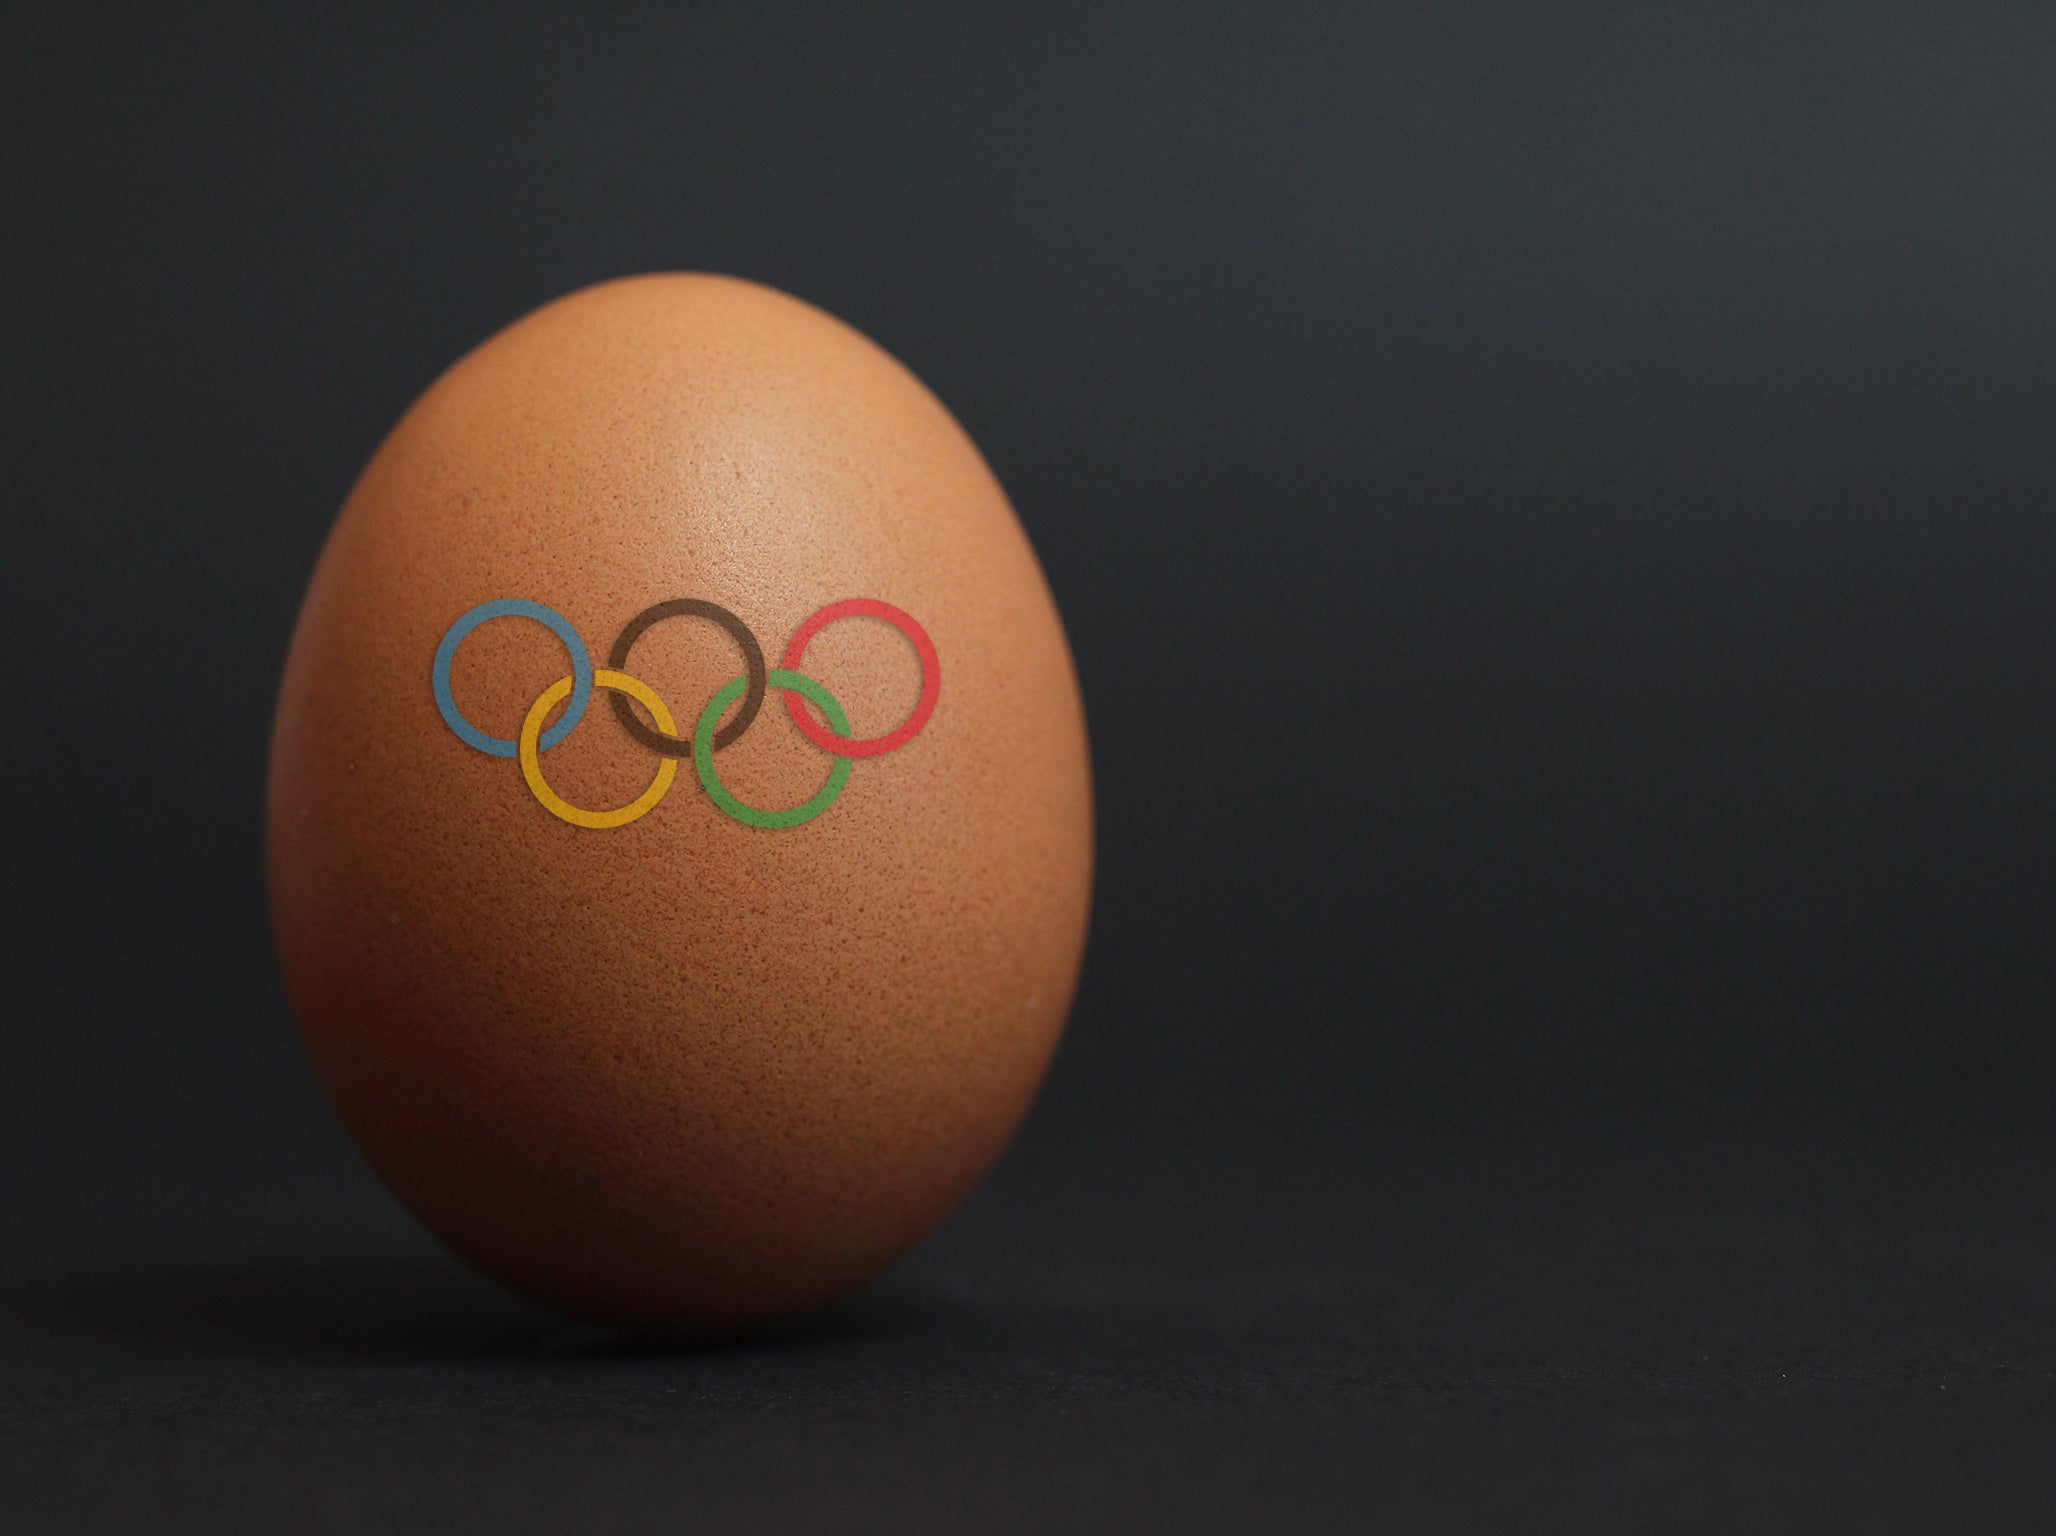 An Olympic issue athlete-ready egg